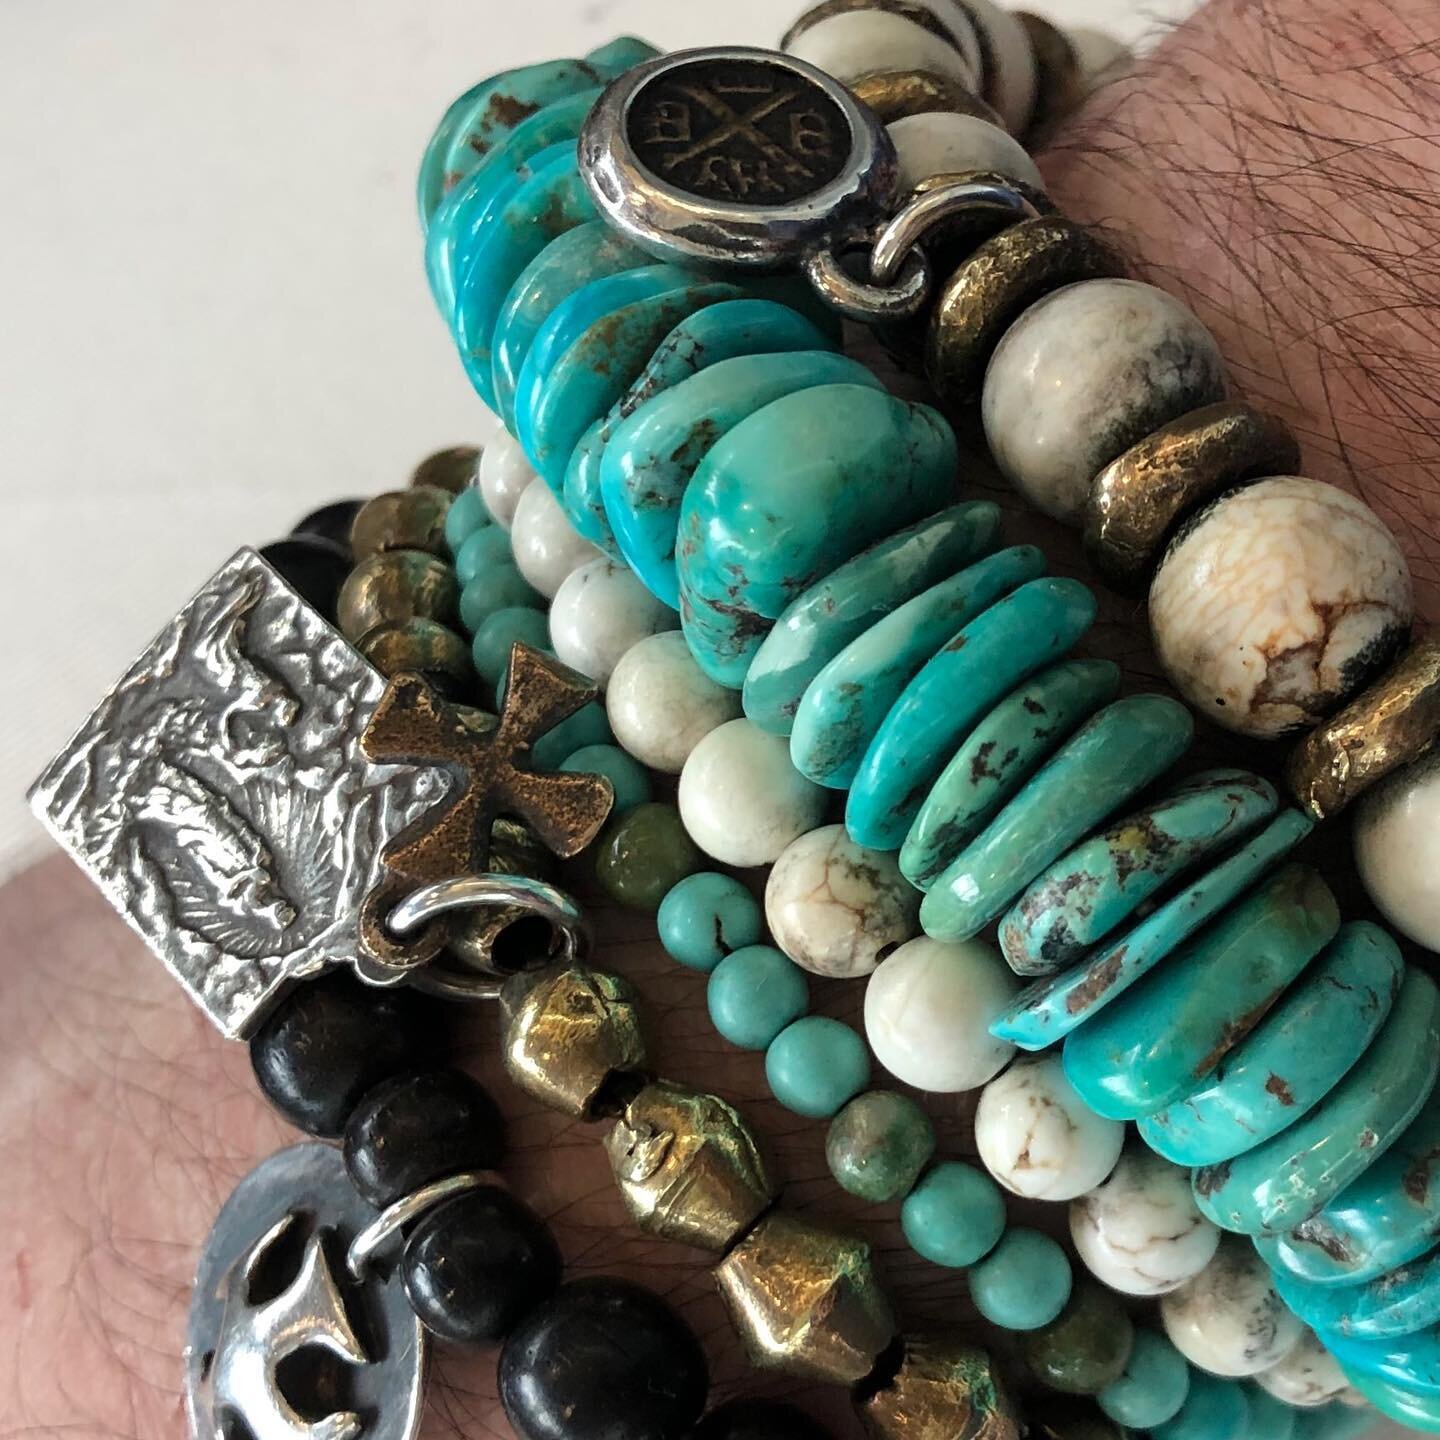 Loving this arm candy! How can you go wrong with turquoise,  white agate, gold, and wood.  Thanks @jlandajewelry you always treat me right.
#blakewoodsdesign #cricketwood #houstoninteriordesigner #mensjewlery #instagay #summer